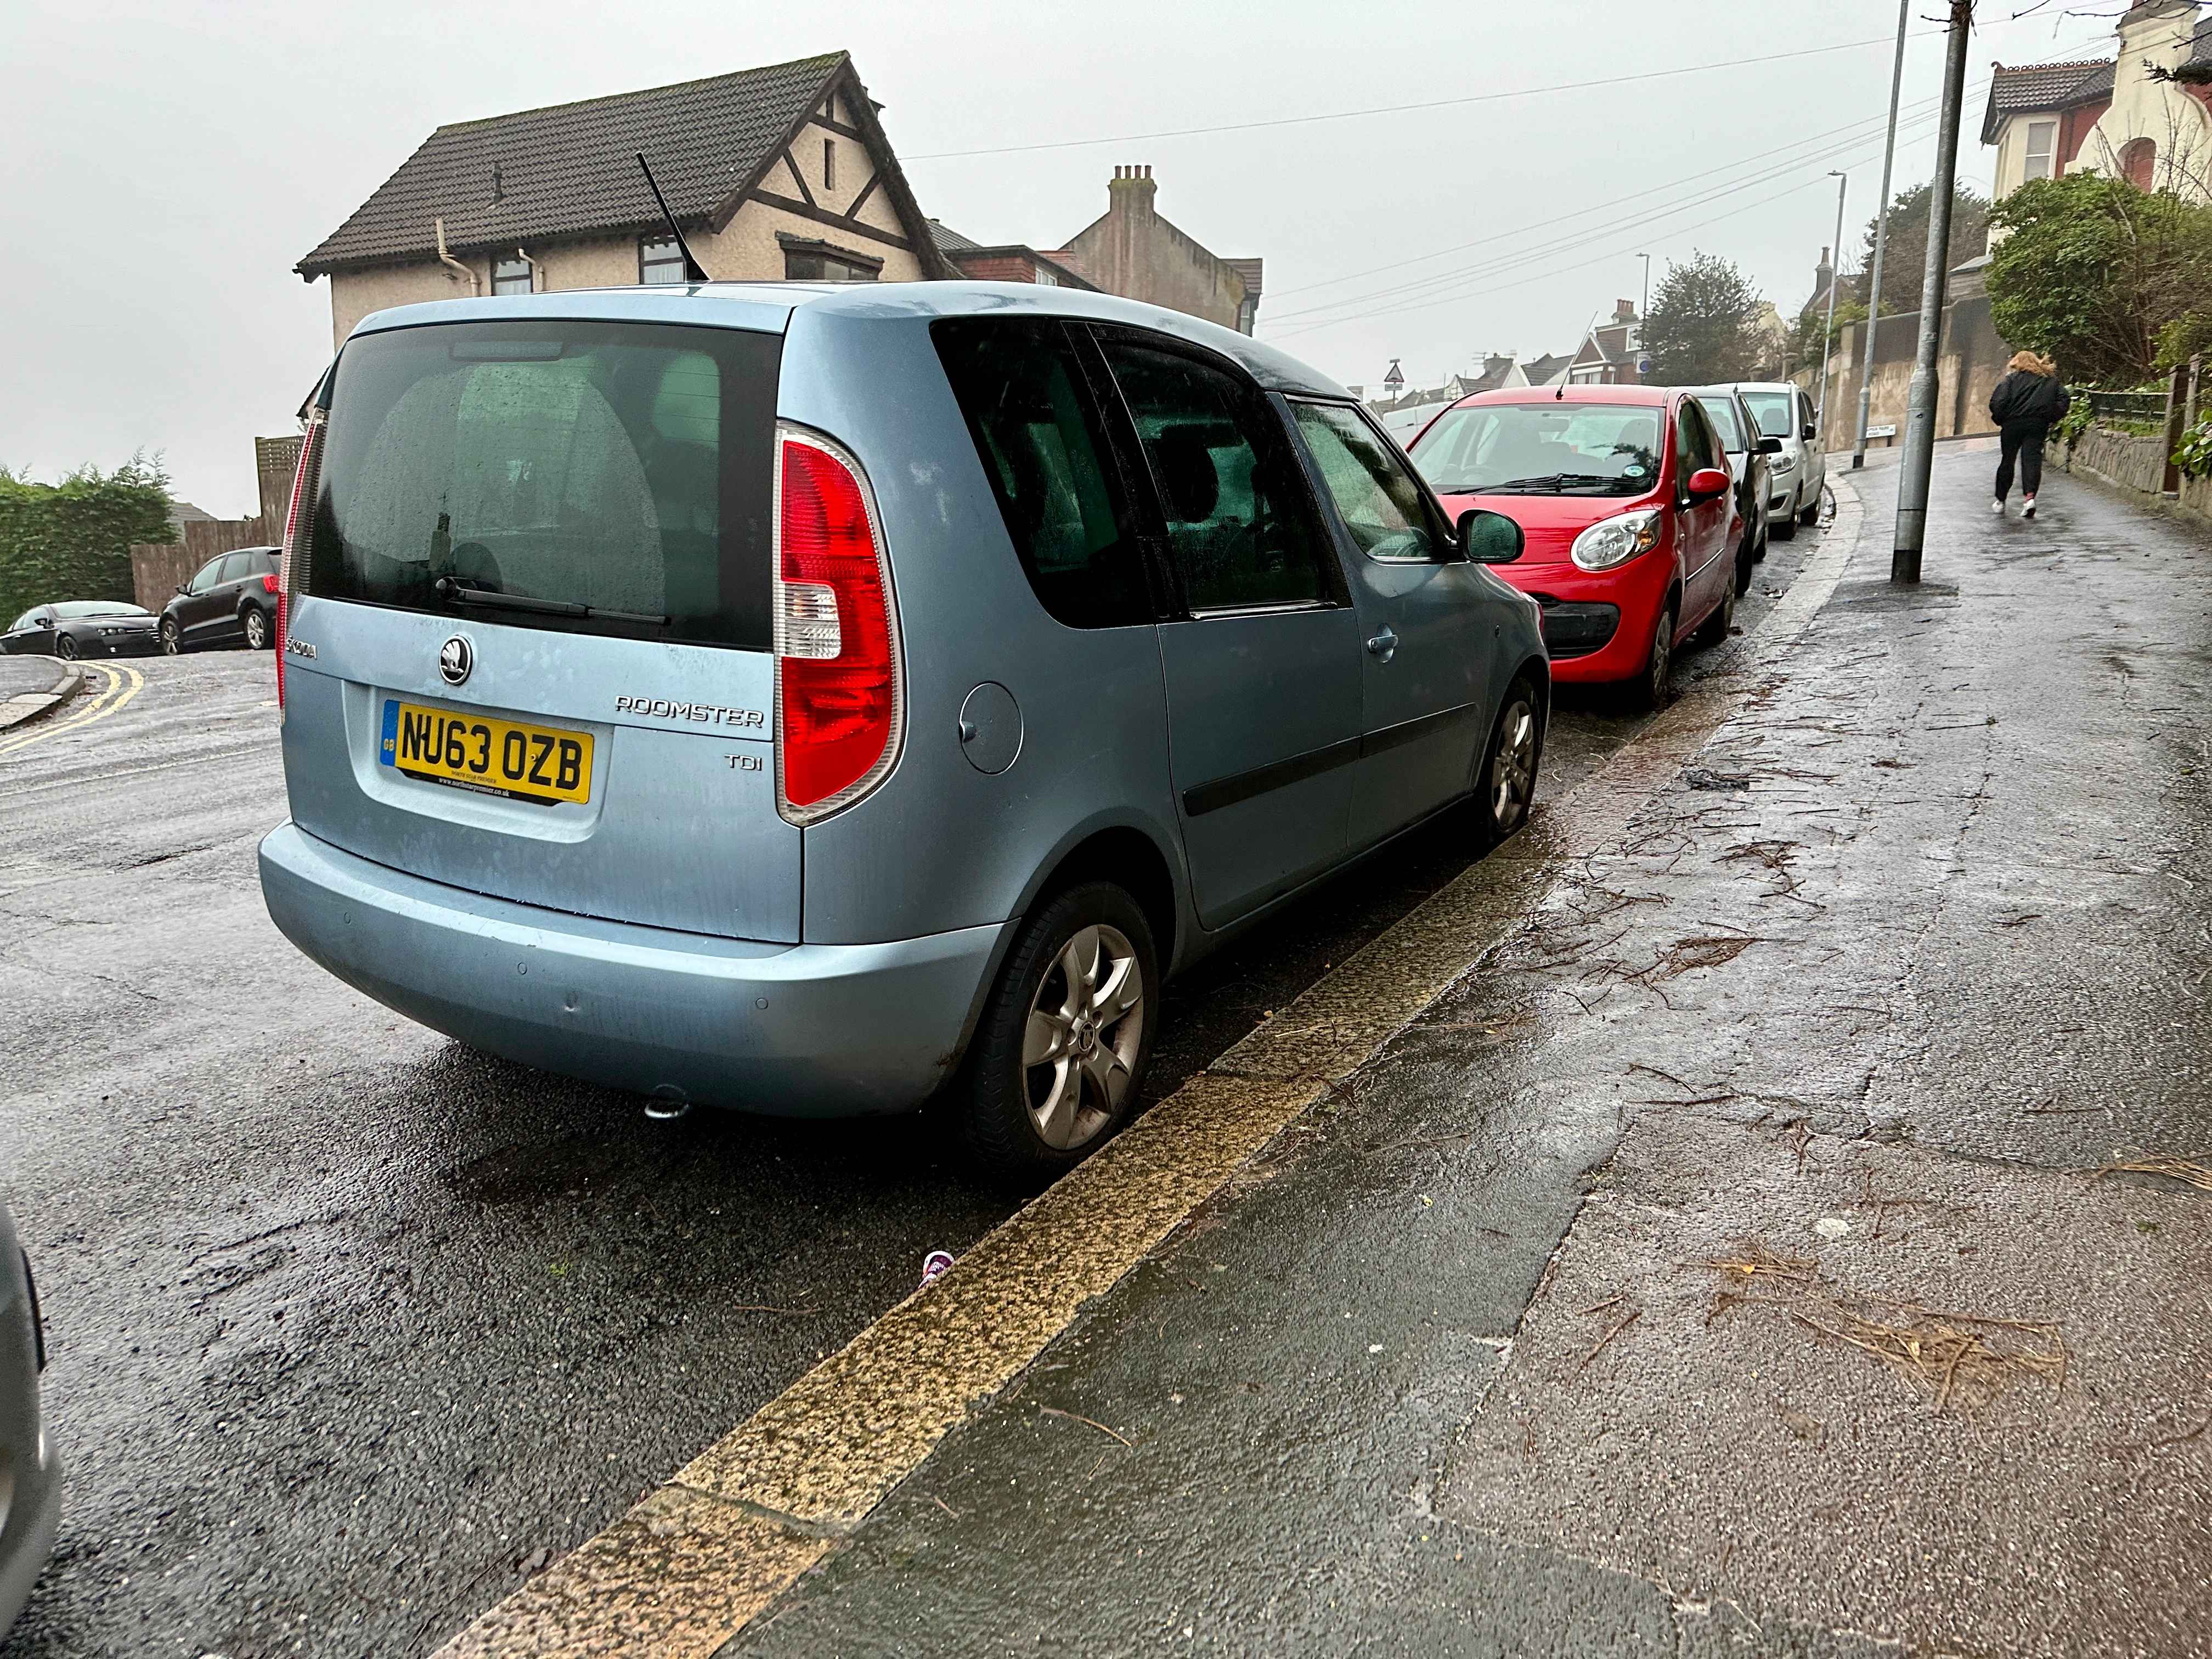 Photograph of NU63 OZB - a Blue Skoda Roomster parked in Hollingdean by a non-resident. The thirteenth of nineteen photographs supplied by the residents of Hollingdean.